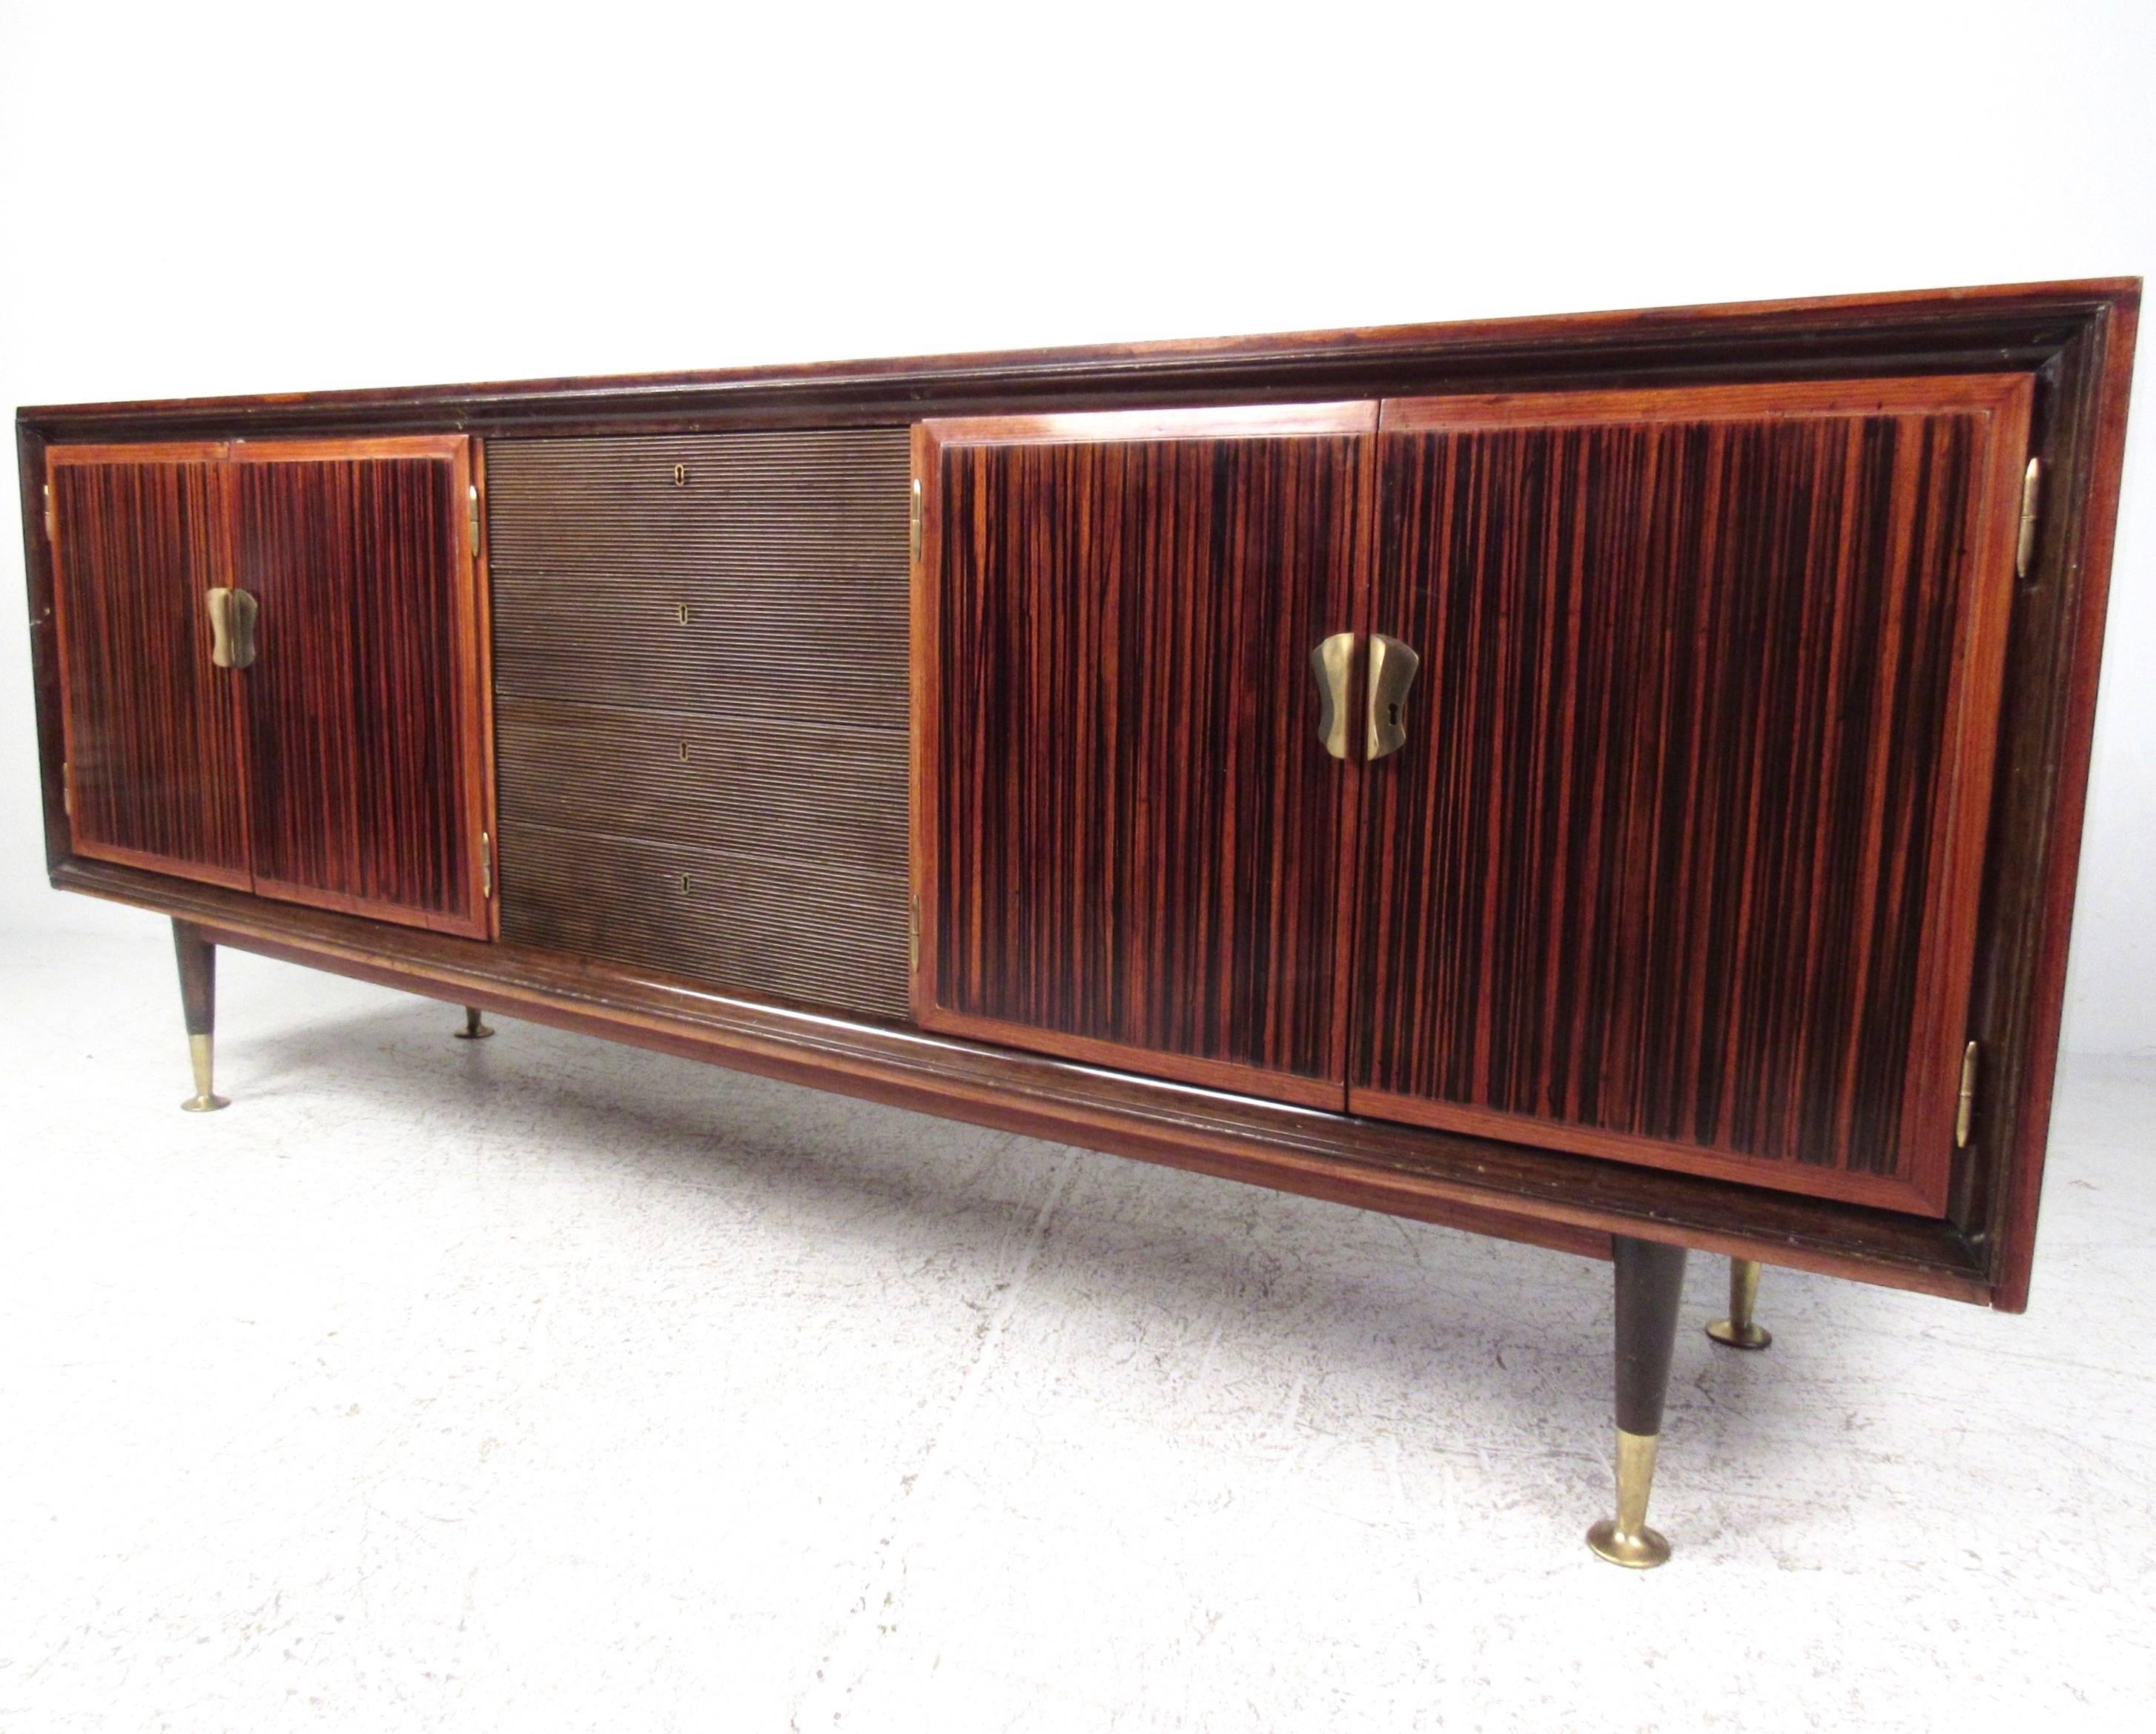 This large-scale Mid-Century sideboard features rich Italian rosewood construction, wide grain cabinet front doors, and unique brass finish trim. Exquisite Osvaldo Borsani style design, the spacious cabinet space is complimented by a set of center